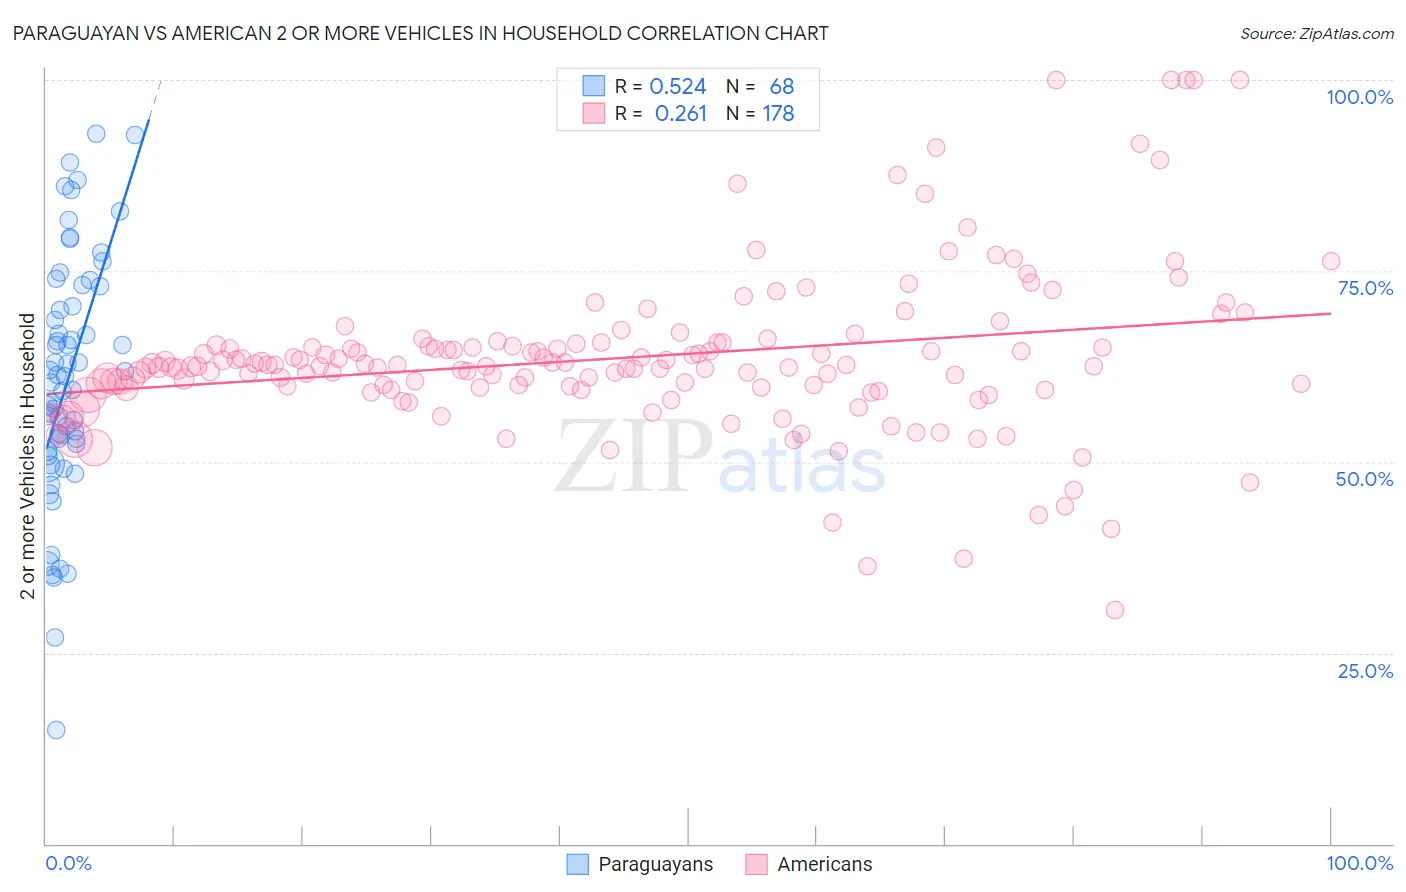 Paraguayan vs American 2 or more Vehicles in Household